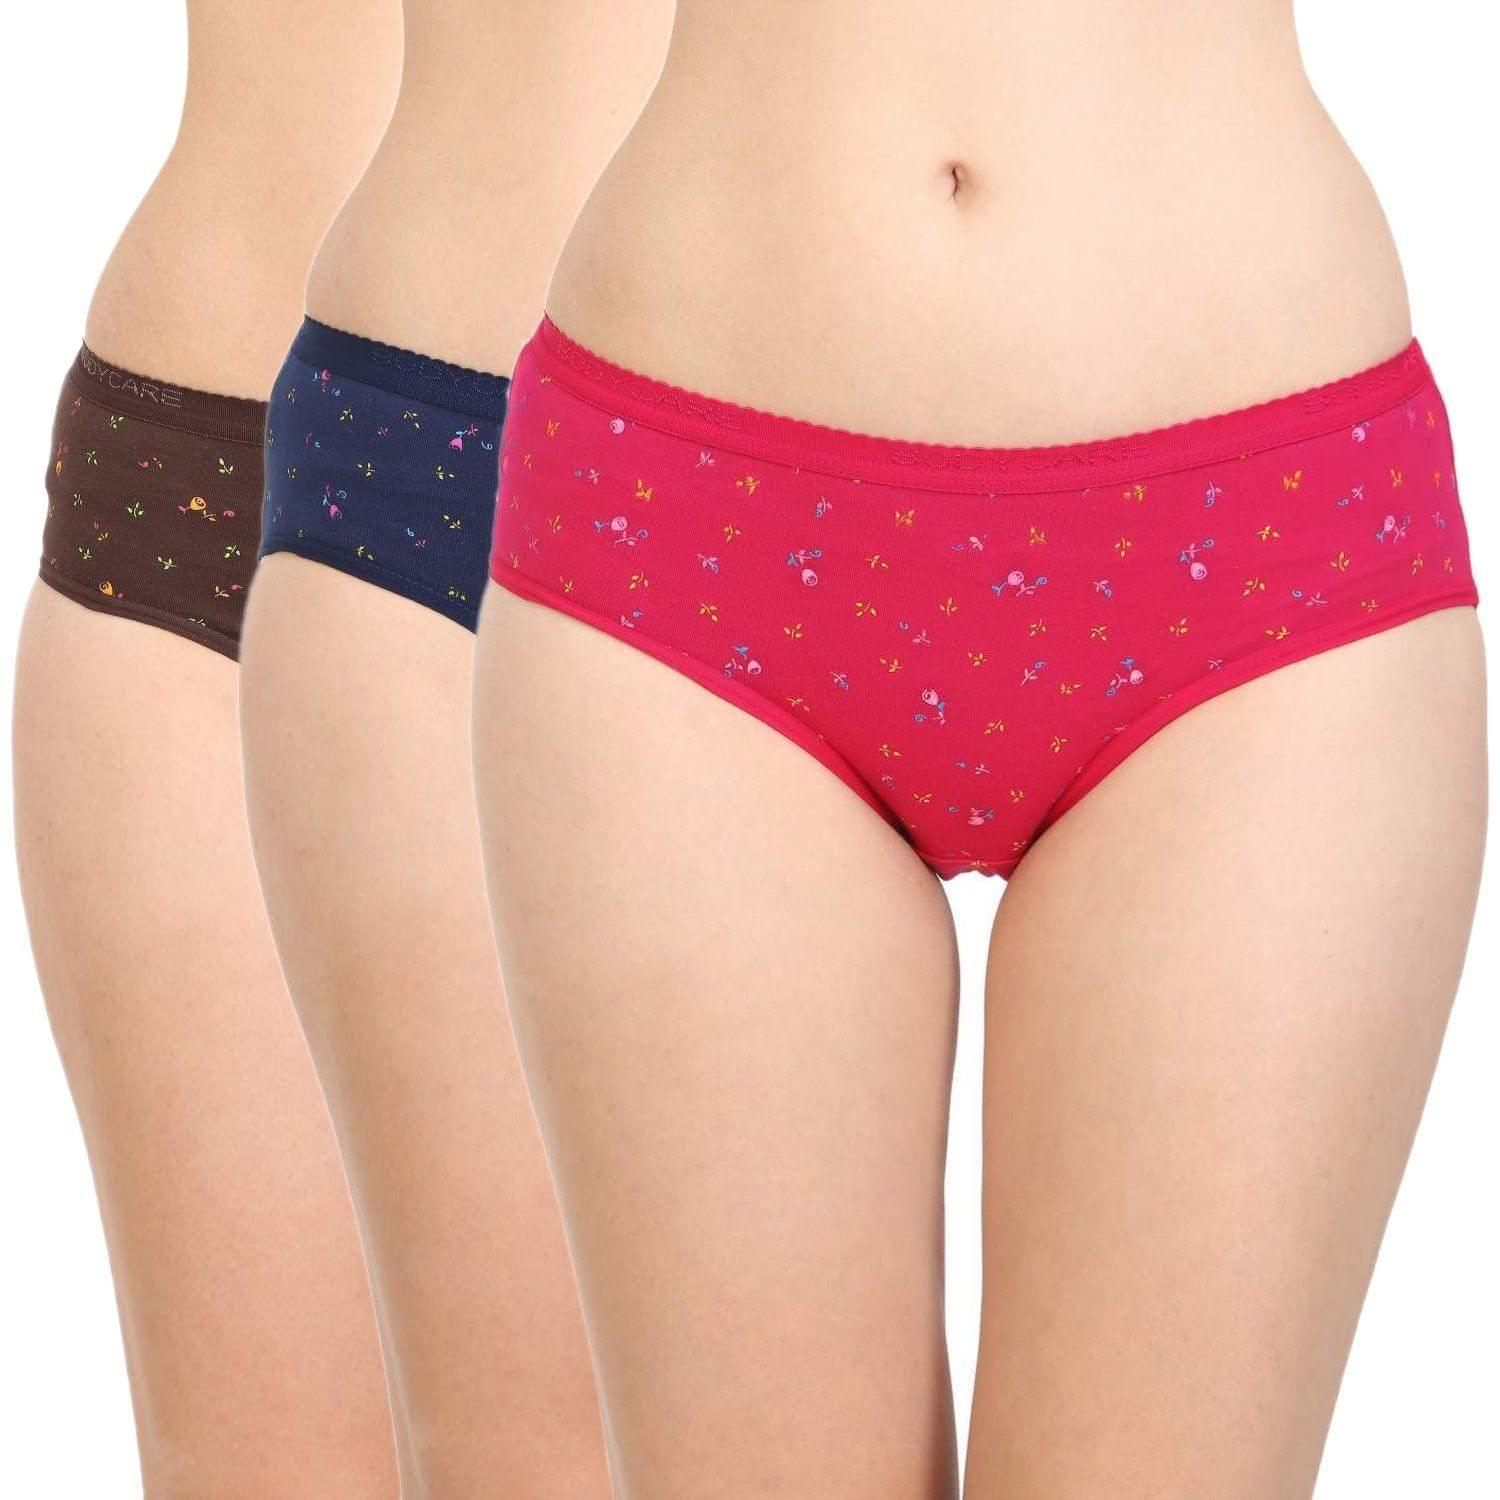 BODYCARE Women's Cotton Panties (Pack of 3) (4000-XL_Color May Vary_38)<br>